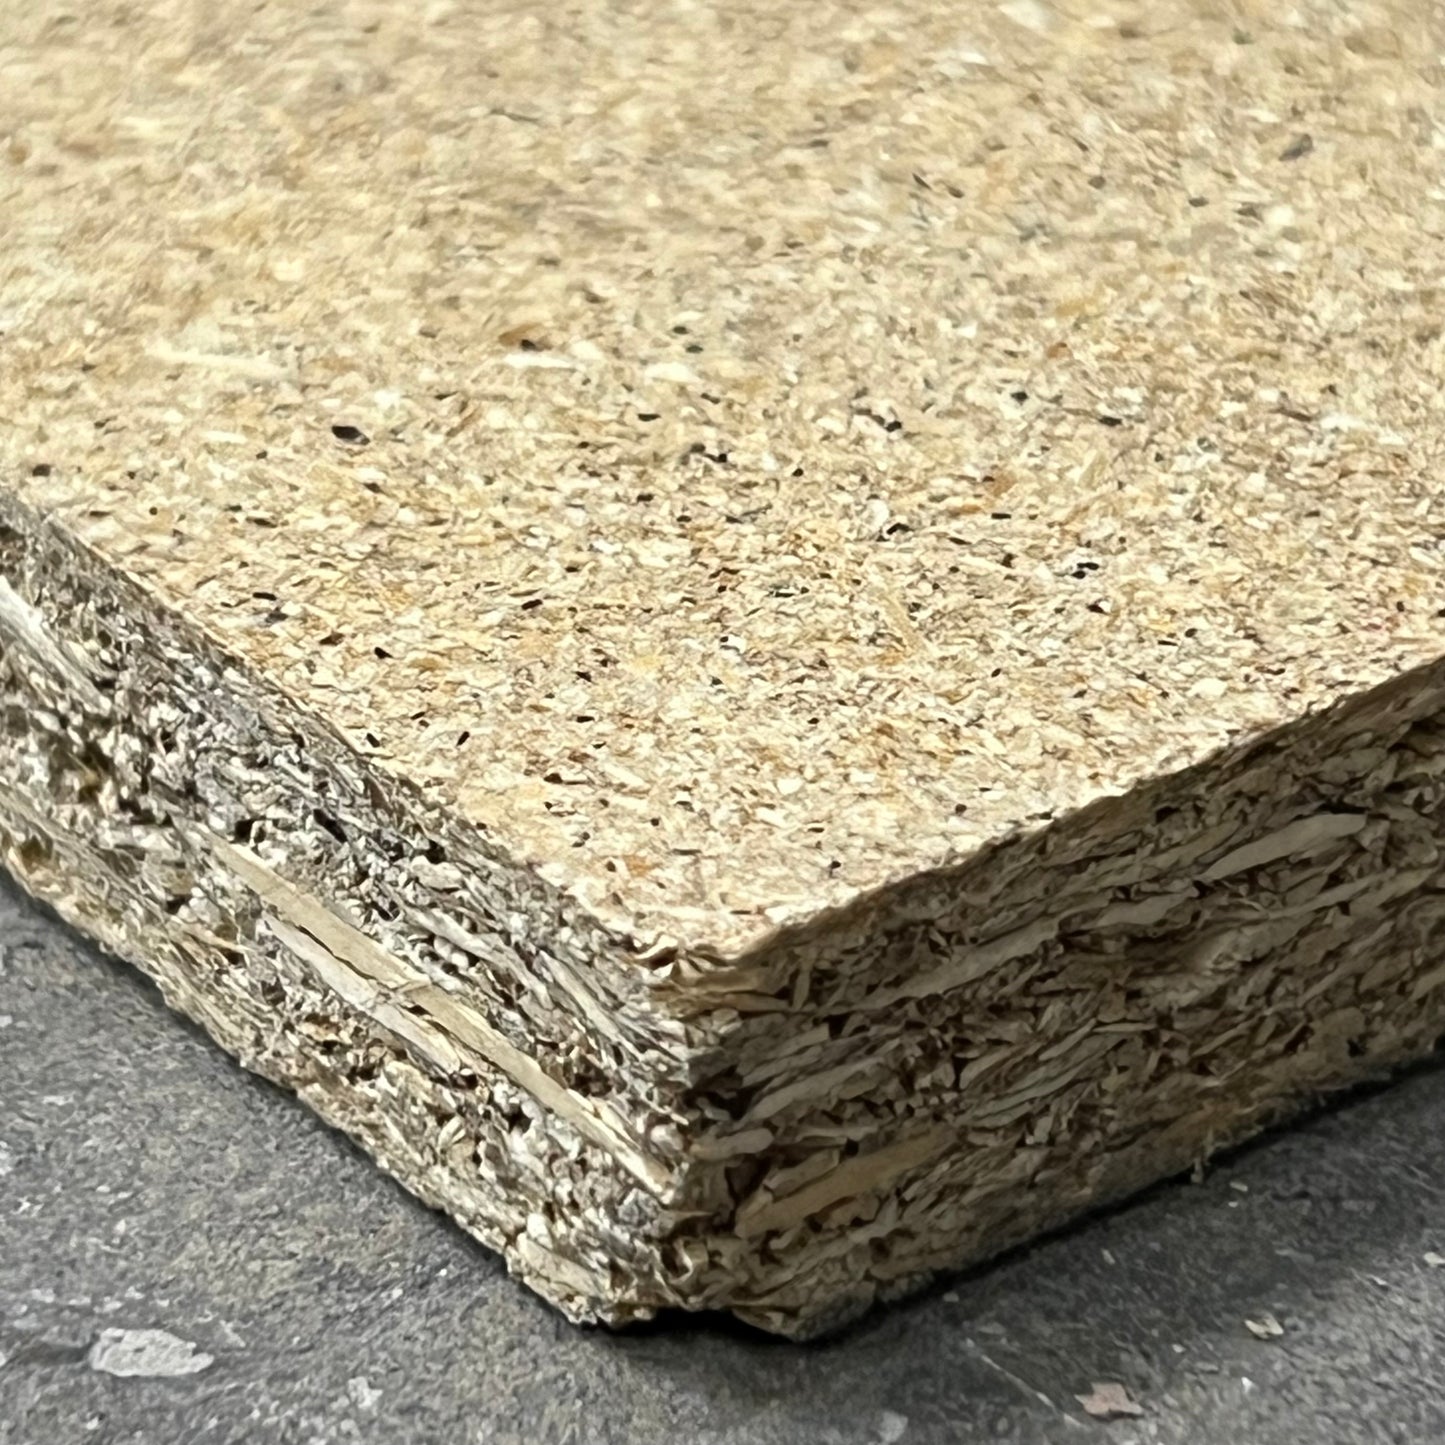 Particle Board 16 PK of 60"x36"x3/4" Sheets Damaged Corners